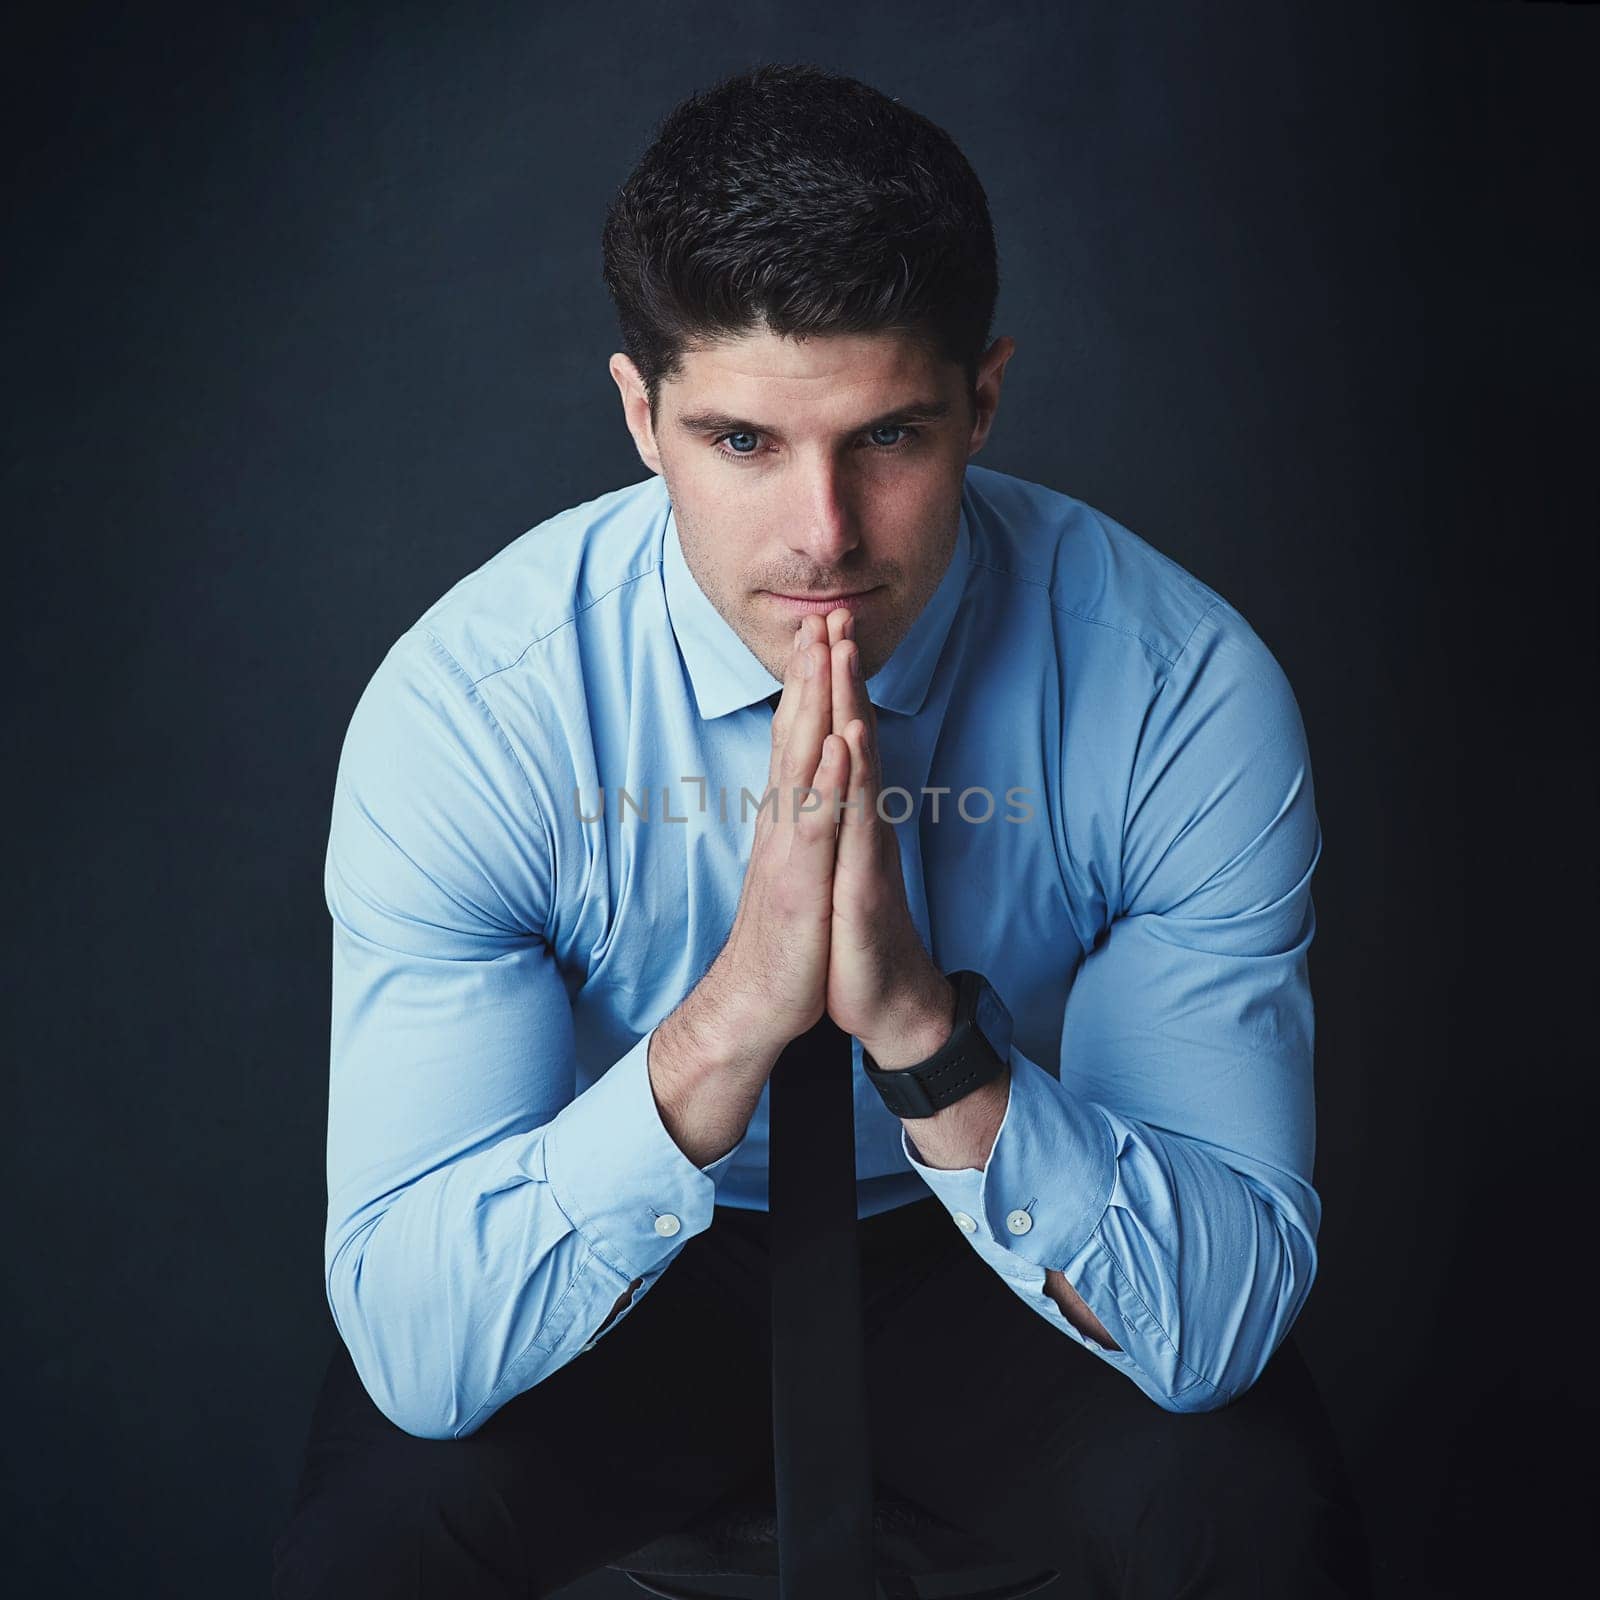 You are bigger than your fears held in your mind. Studio shot of a young businessman looking thoughtful against a dark background. by YuriArcurs